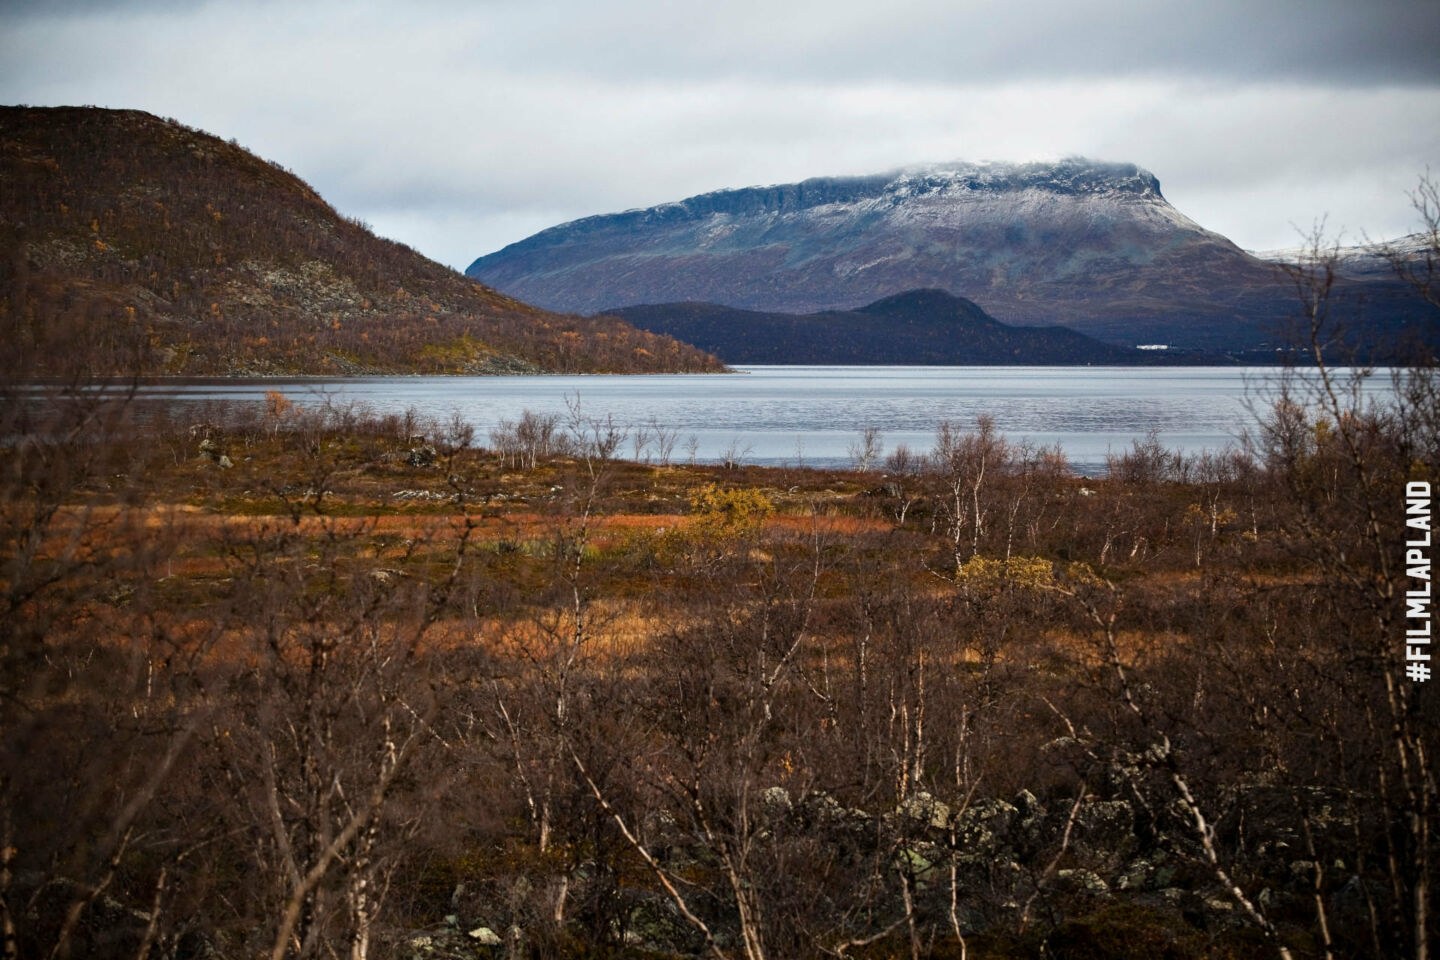 Autumn colors in Kilpisjärvi, a feature of filming in Finnish Lapland locations